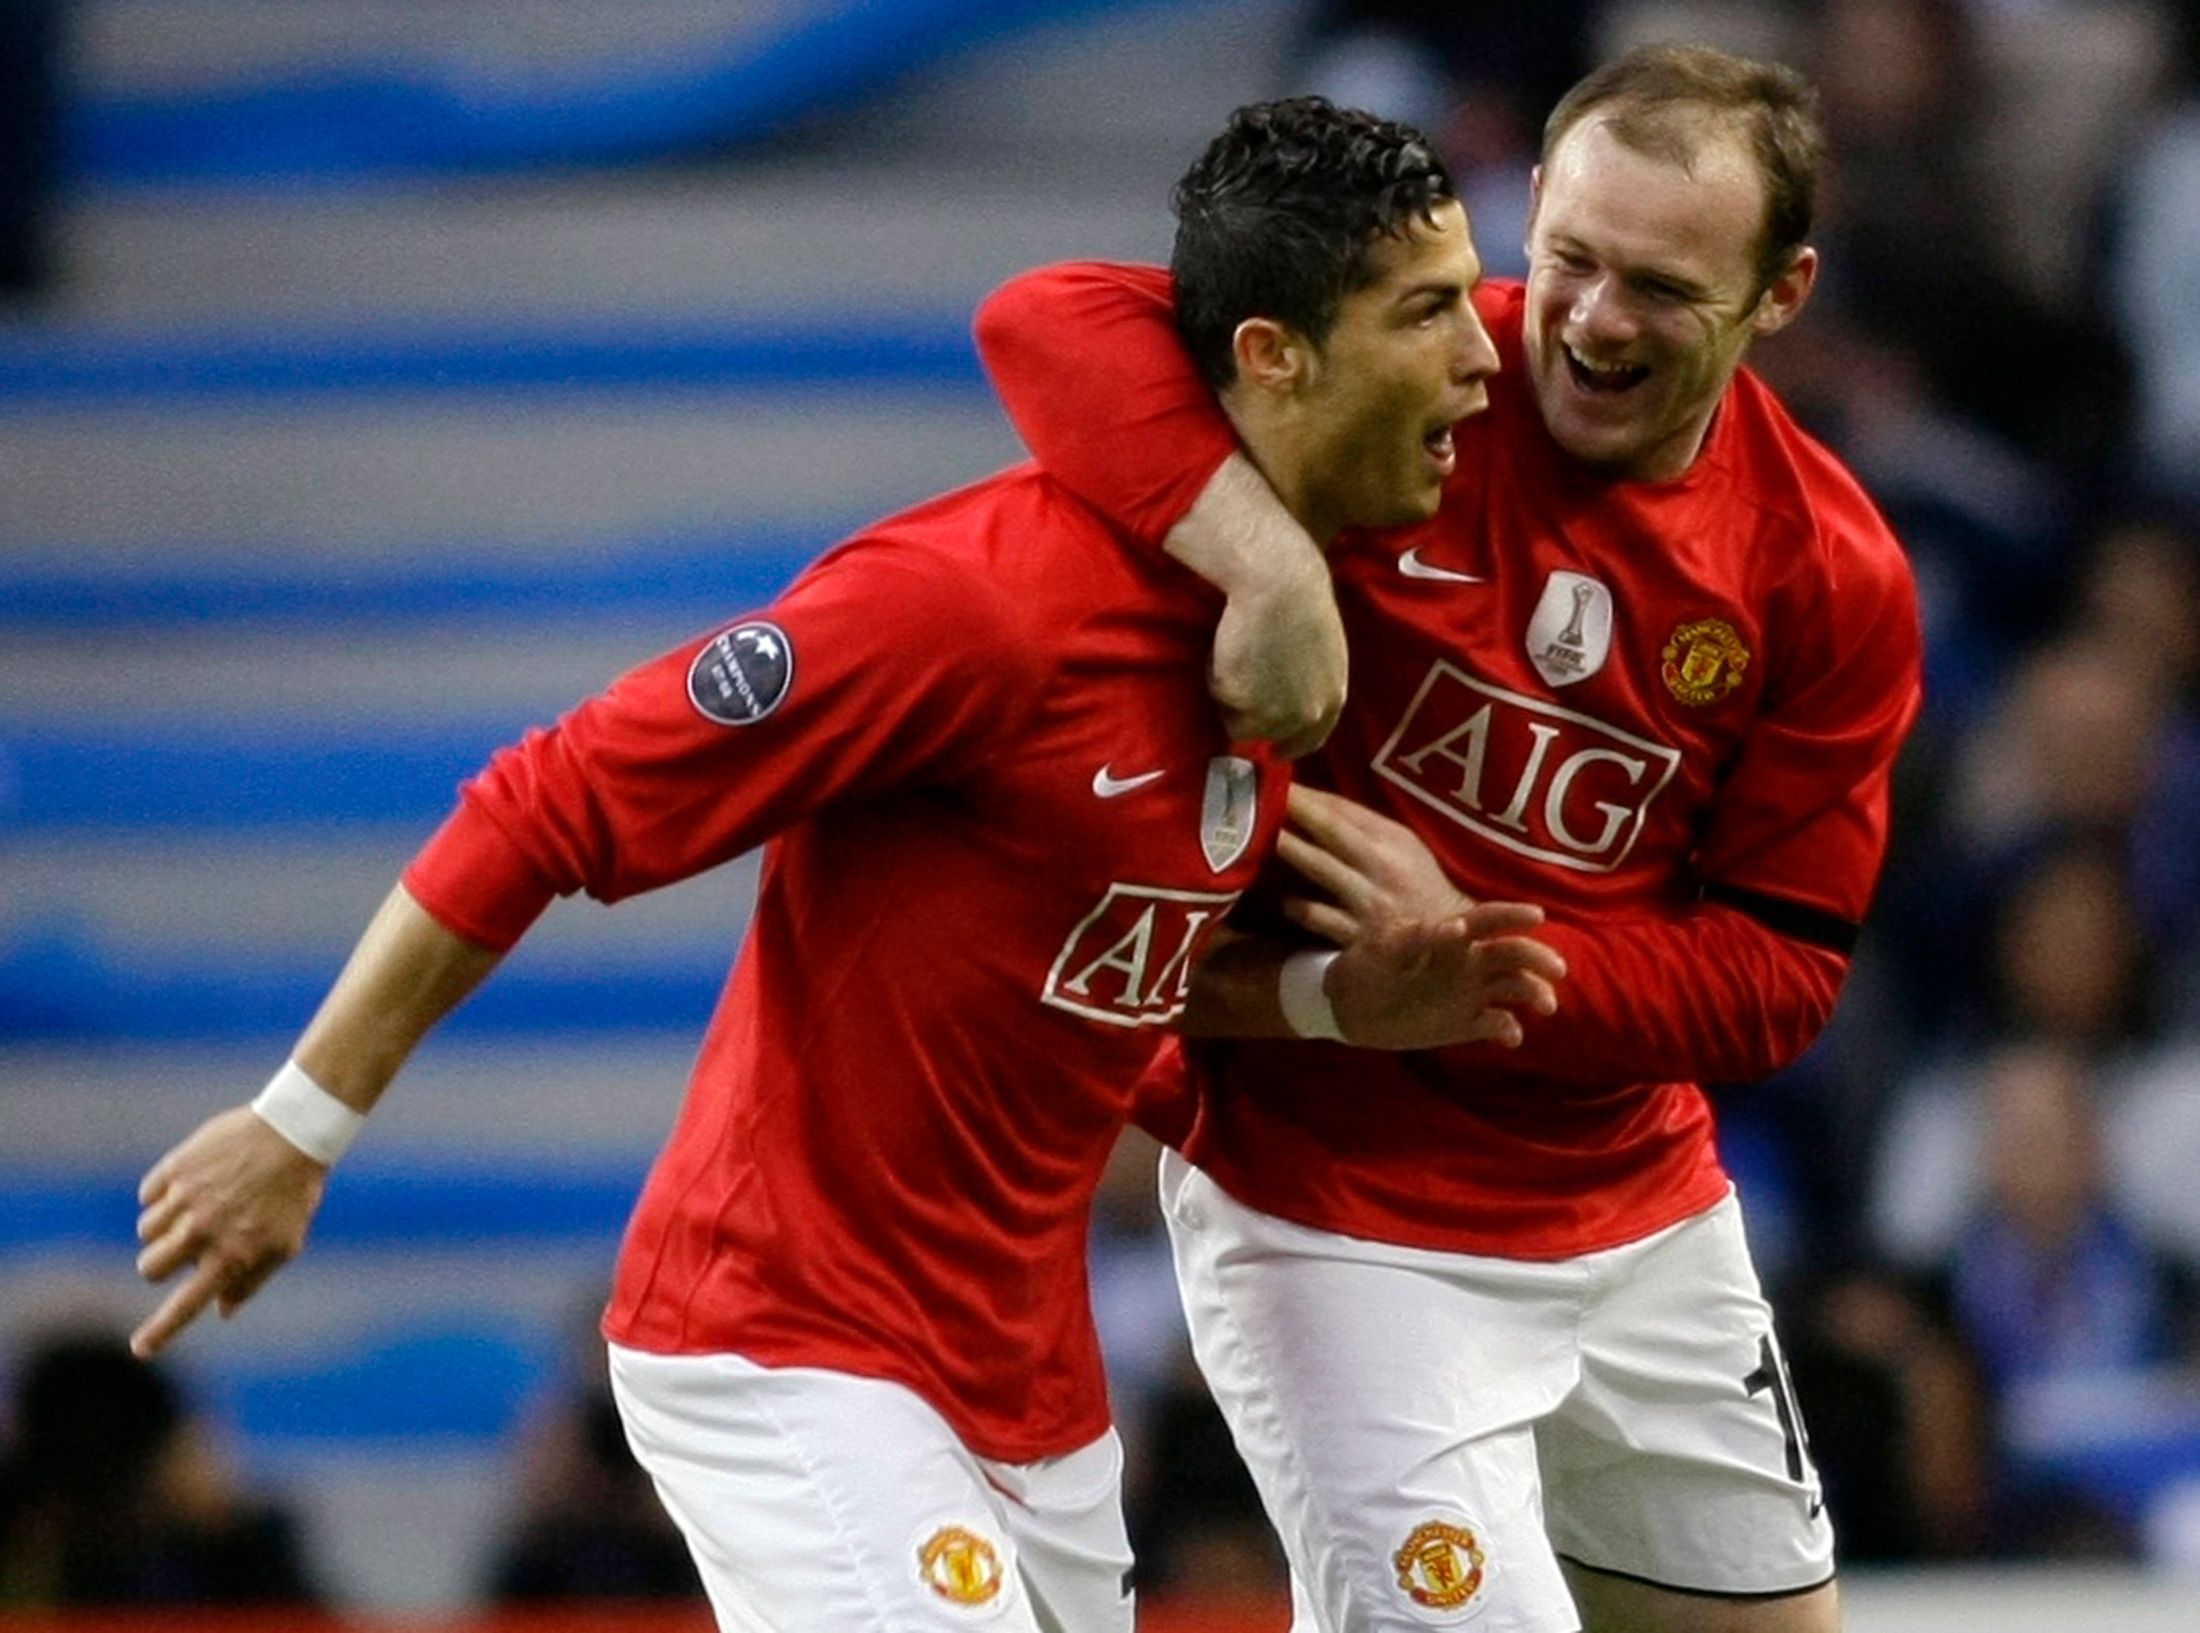 Cristiano Ronaldo and Wayne Rooney in action for Man Utd